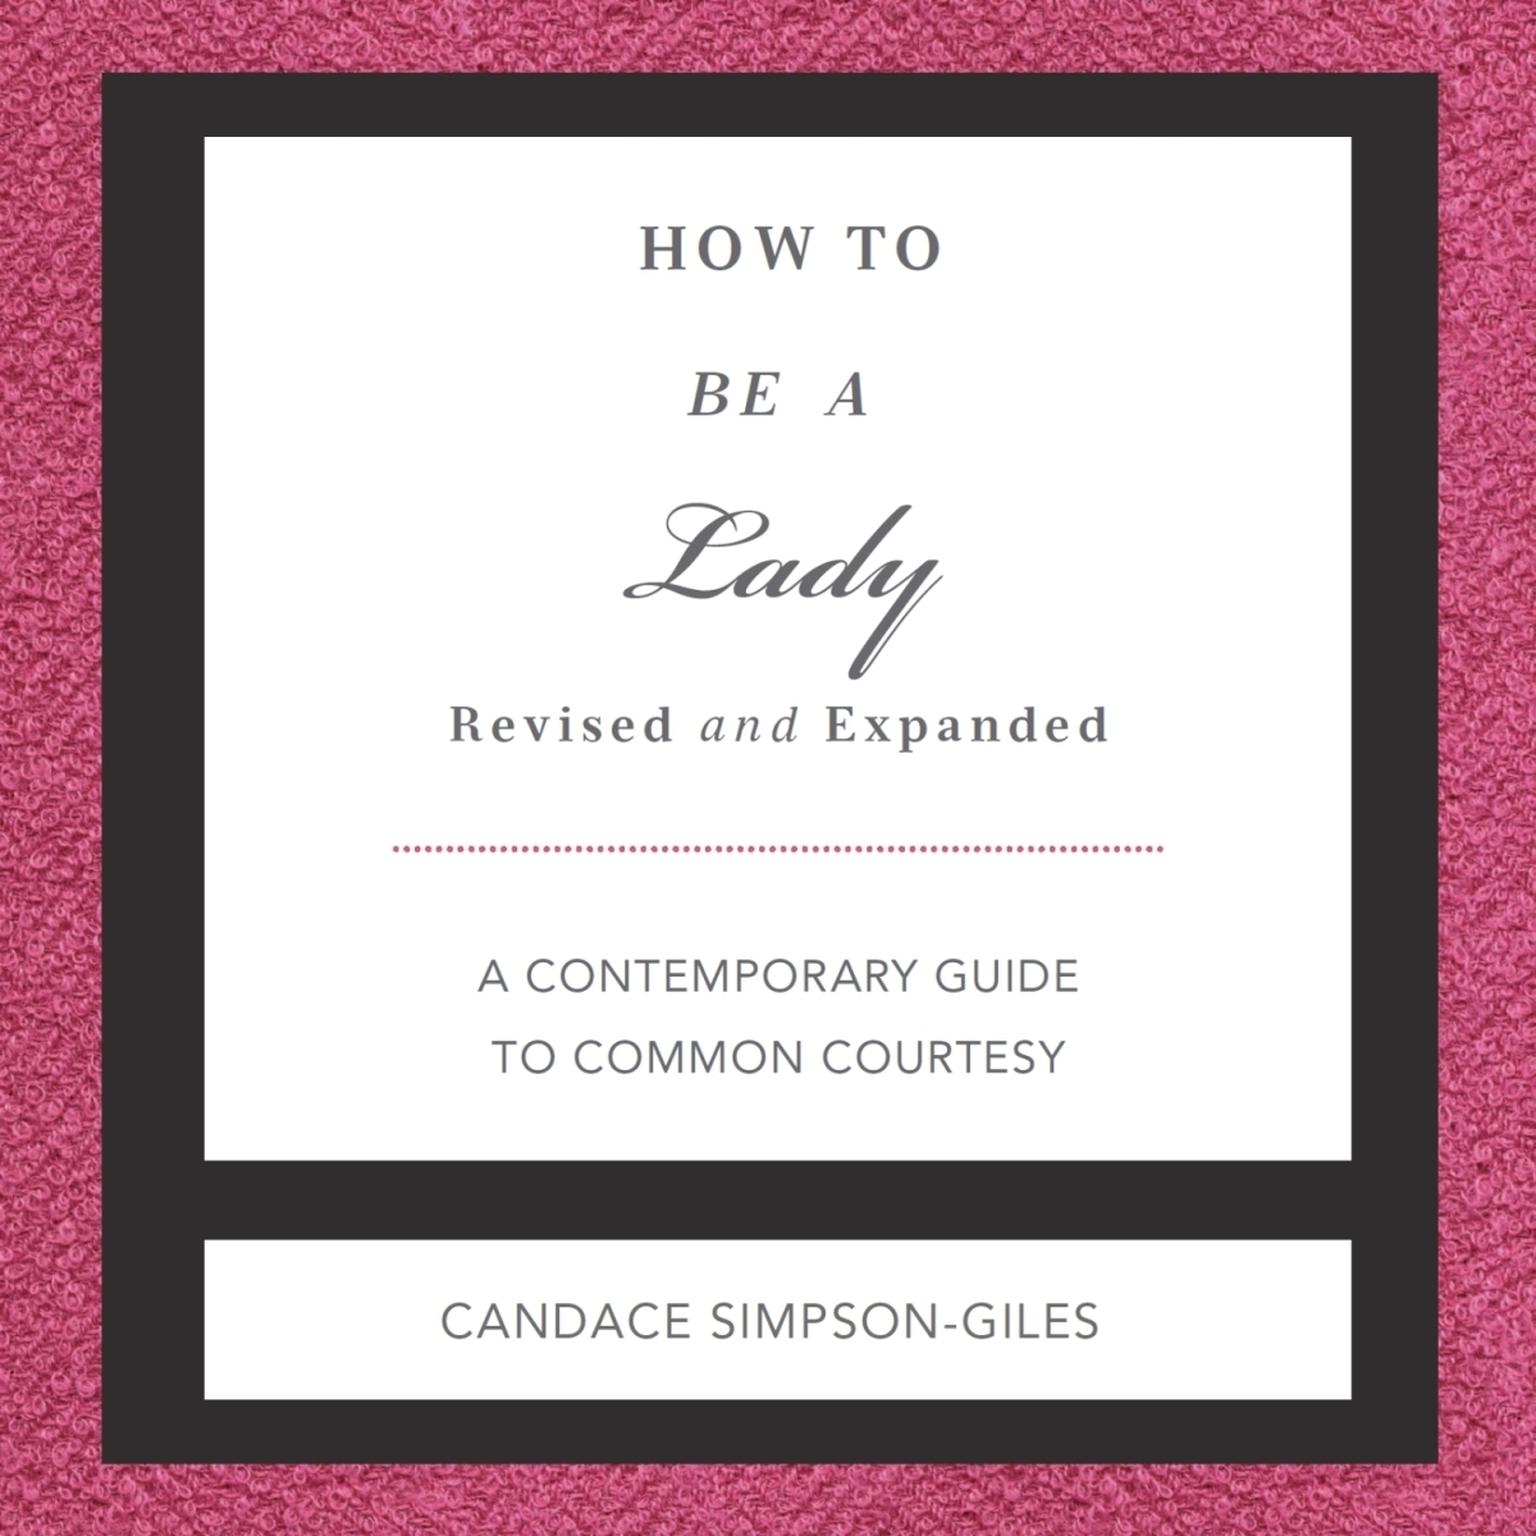 How to Be a Lady: A Contemporary Guide to Common Courtesy Audiobook, by Candace Simpson-Giles